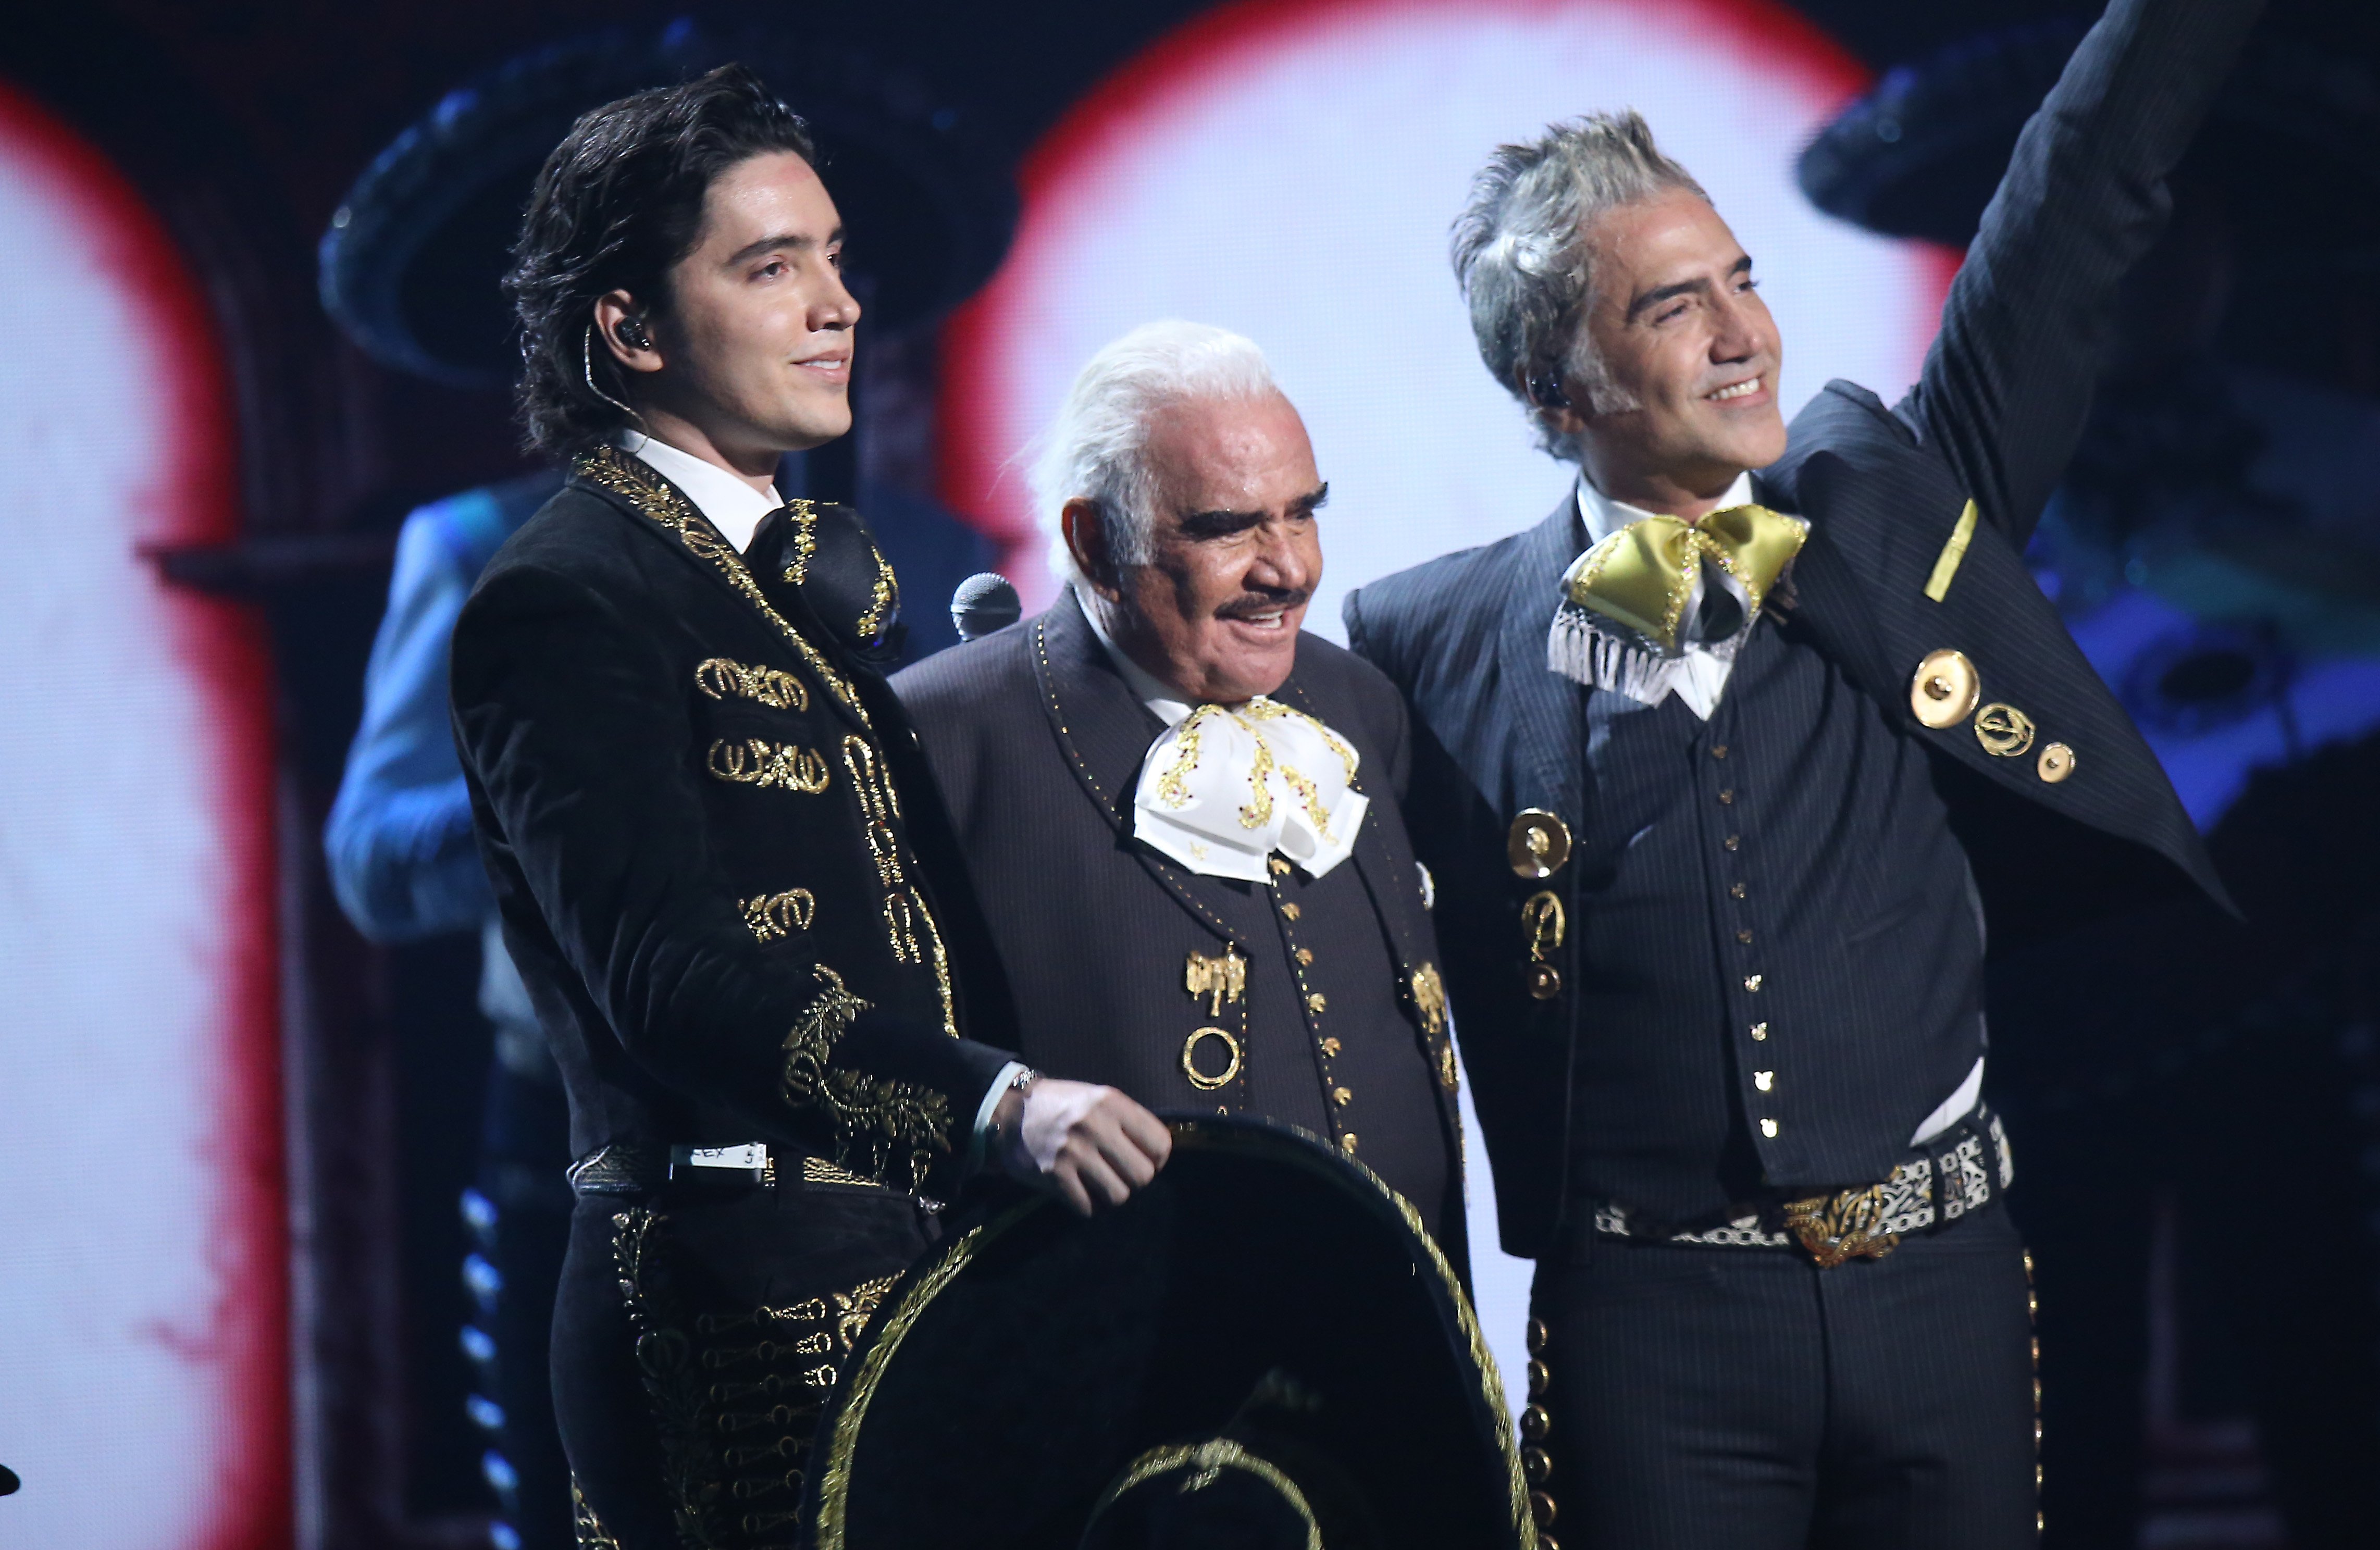 Alex Fernández, Vicente Fernandez, and Alejandro Fernández at the 20th Annual Latin Grammy Awards in Las Vegas on November 14, 2019 | Source: Getty Images